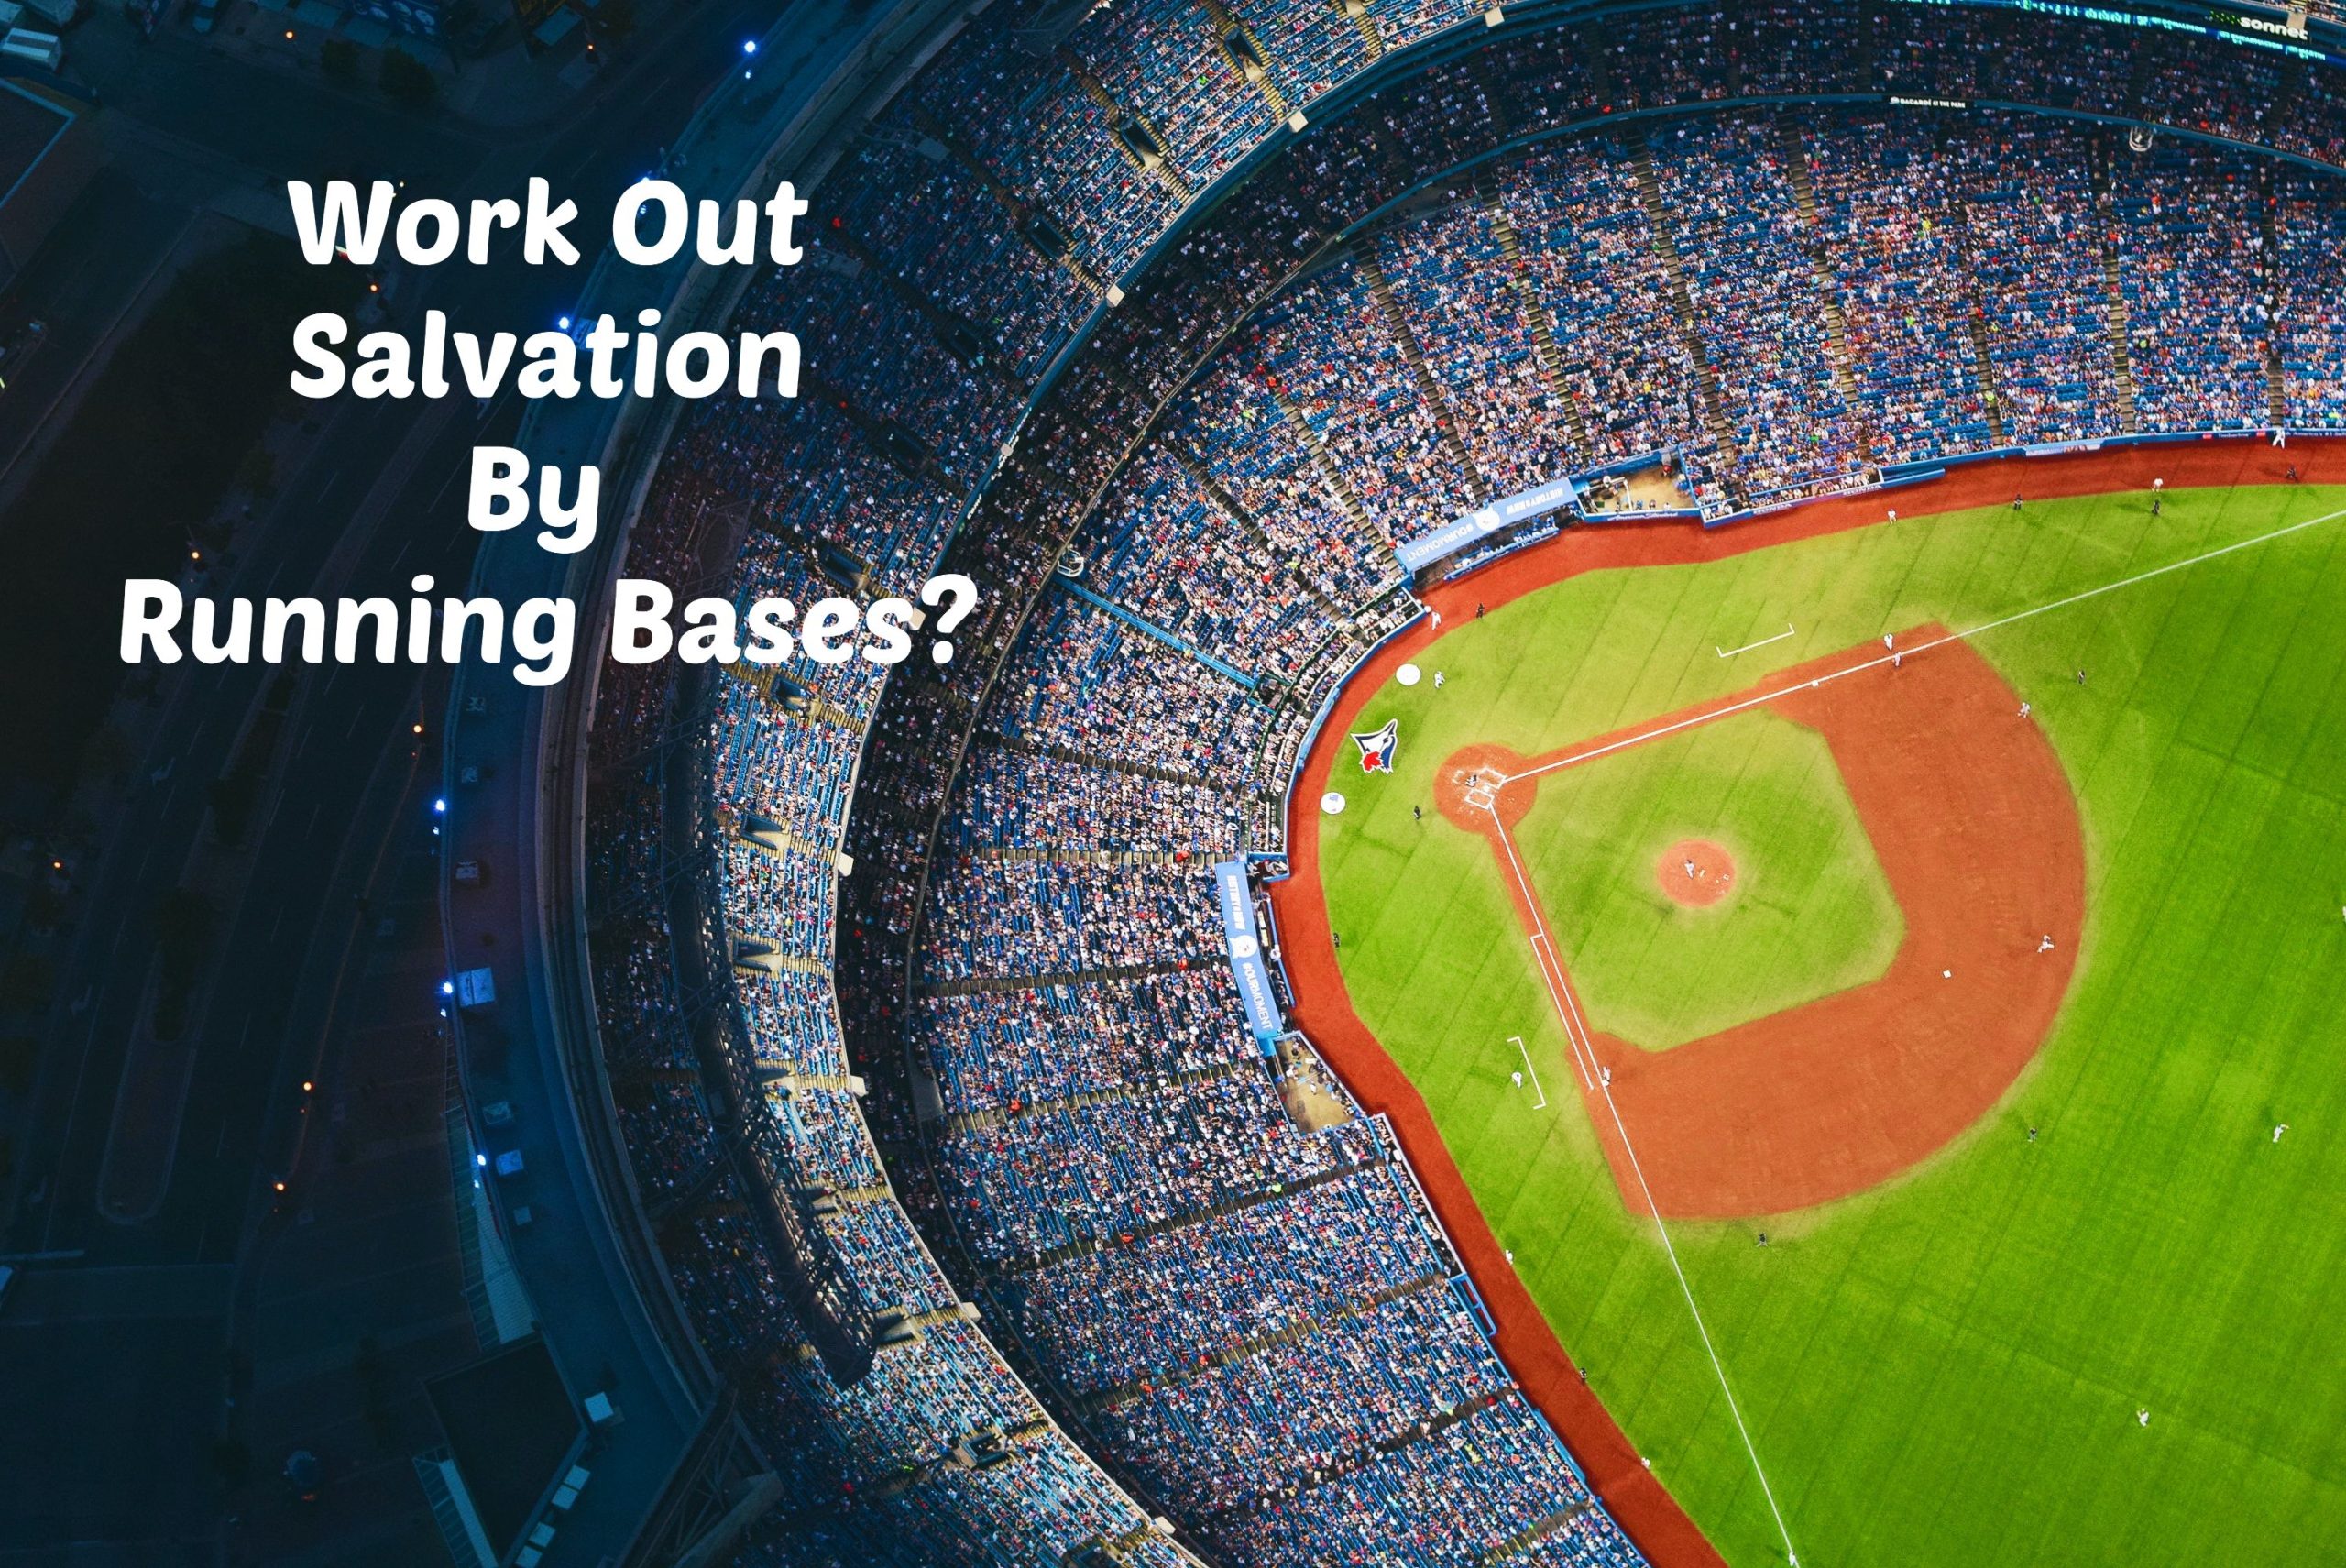 Work Out Salvation by Running Bases